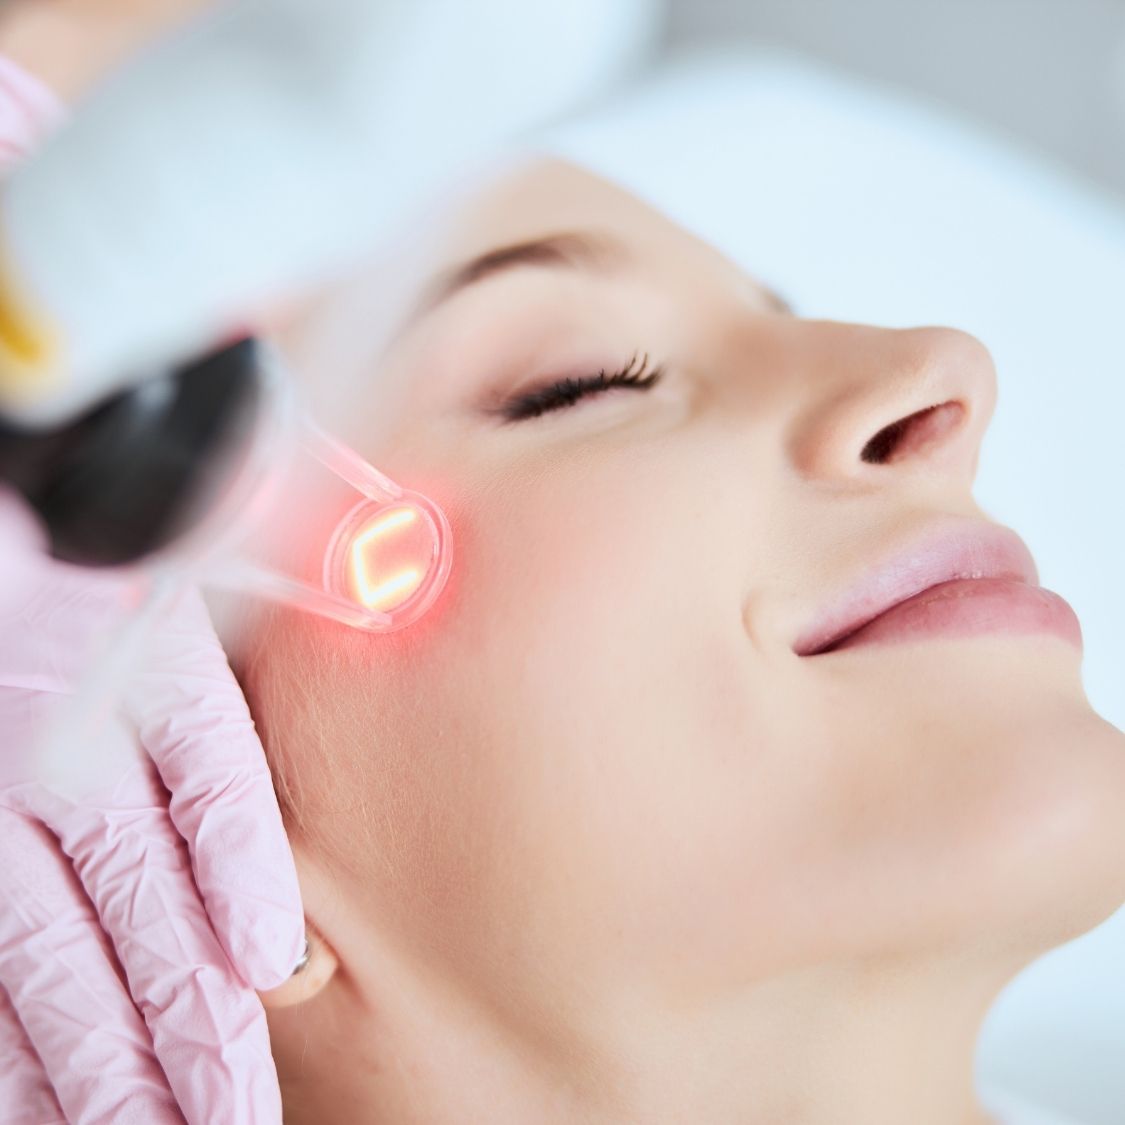 Ways We Use Lasers for Surgical Procedures